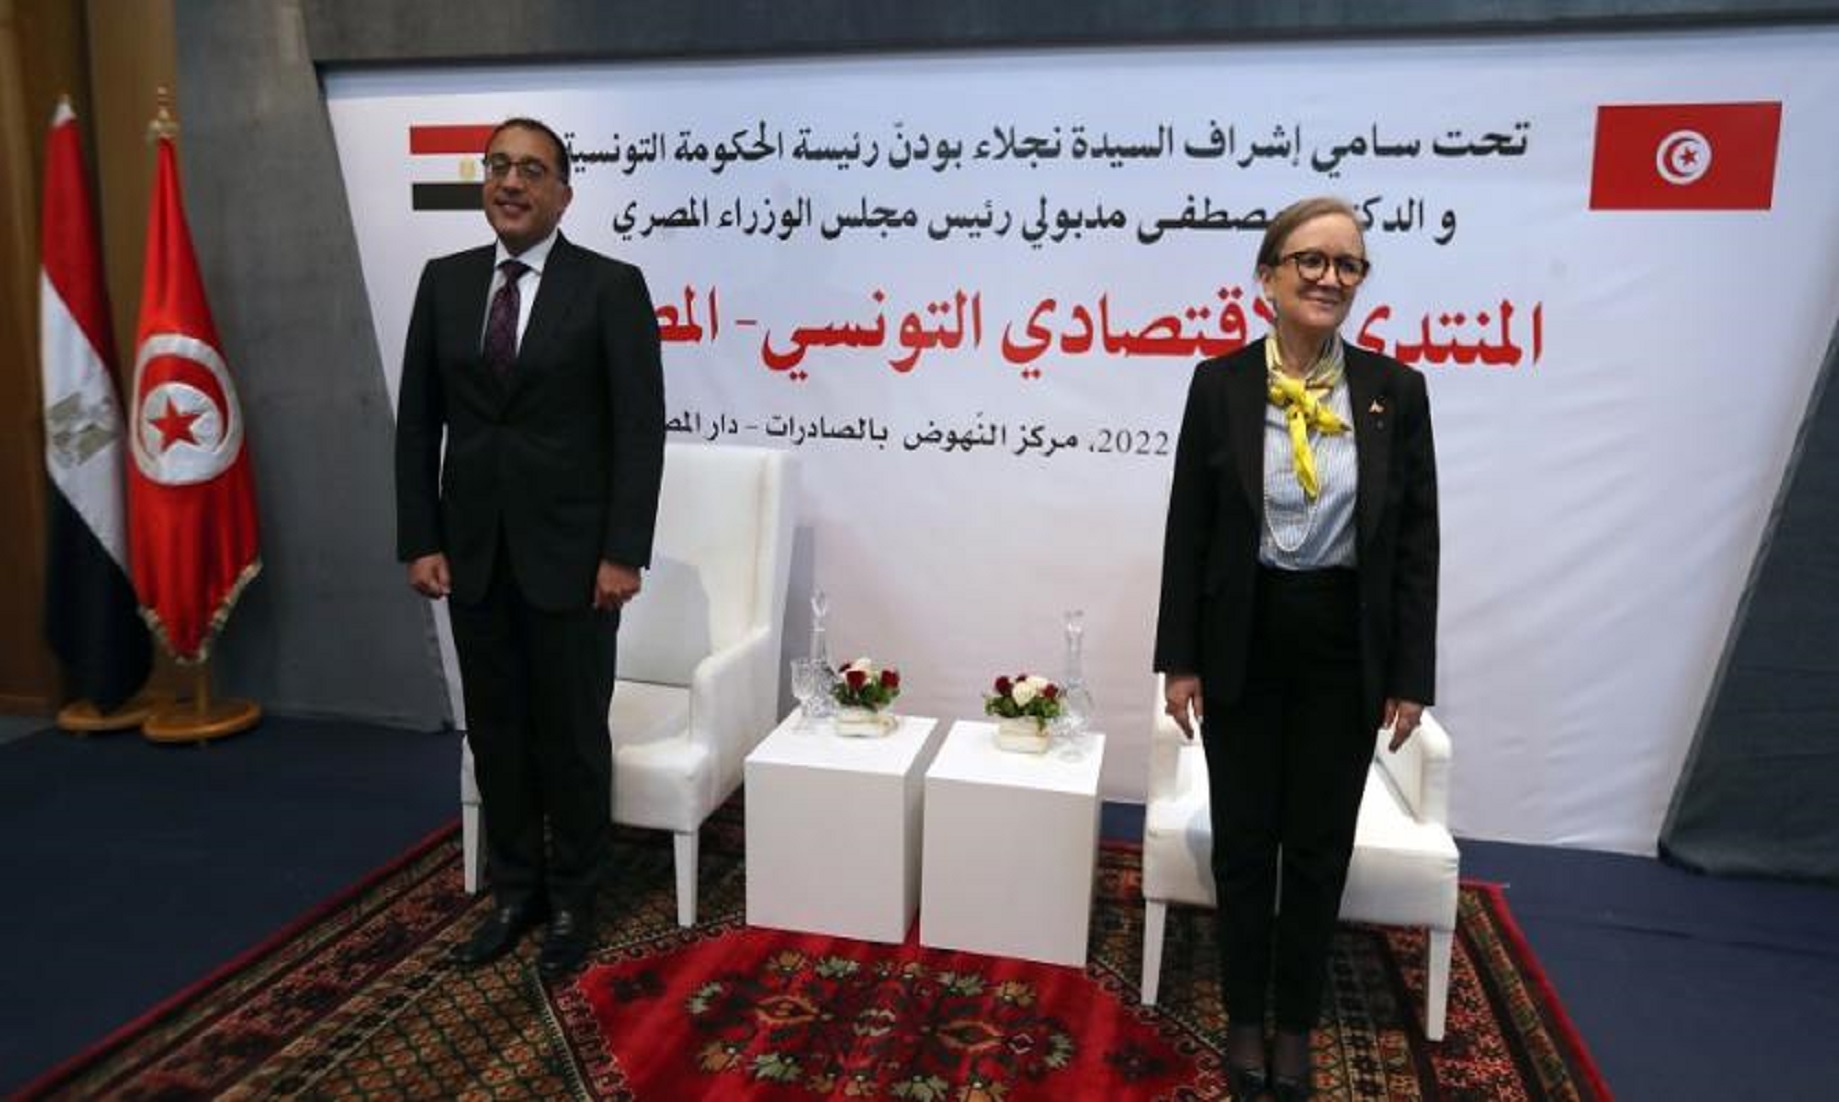 Tunisia, Egypt Sign Agreements To Strengthen Cooperation